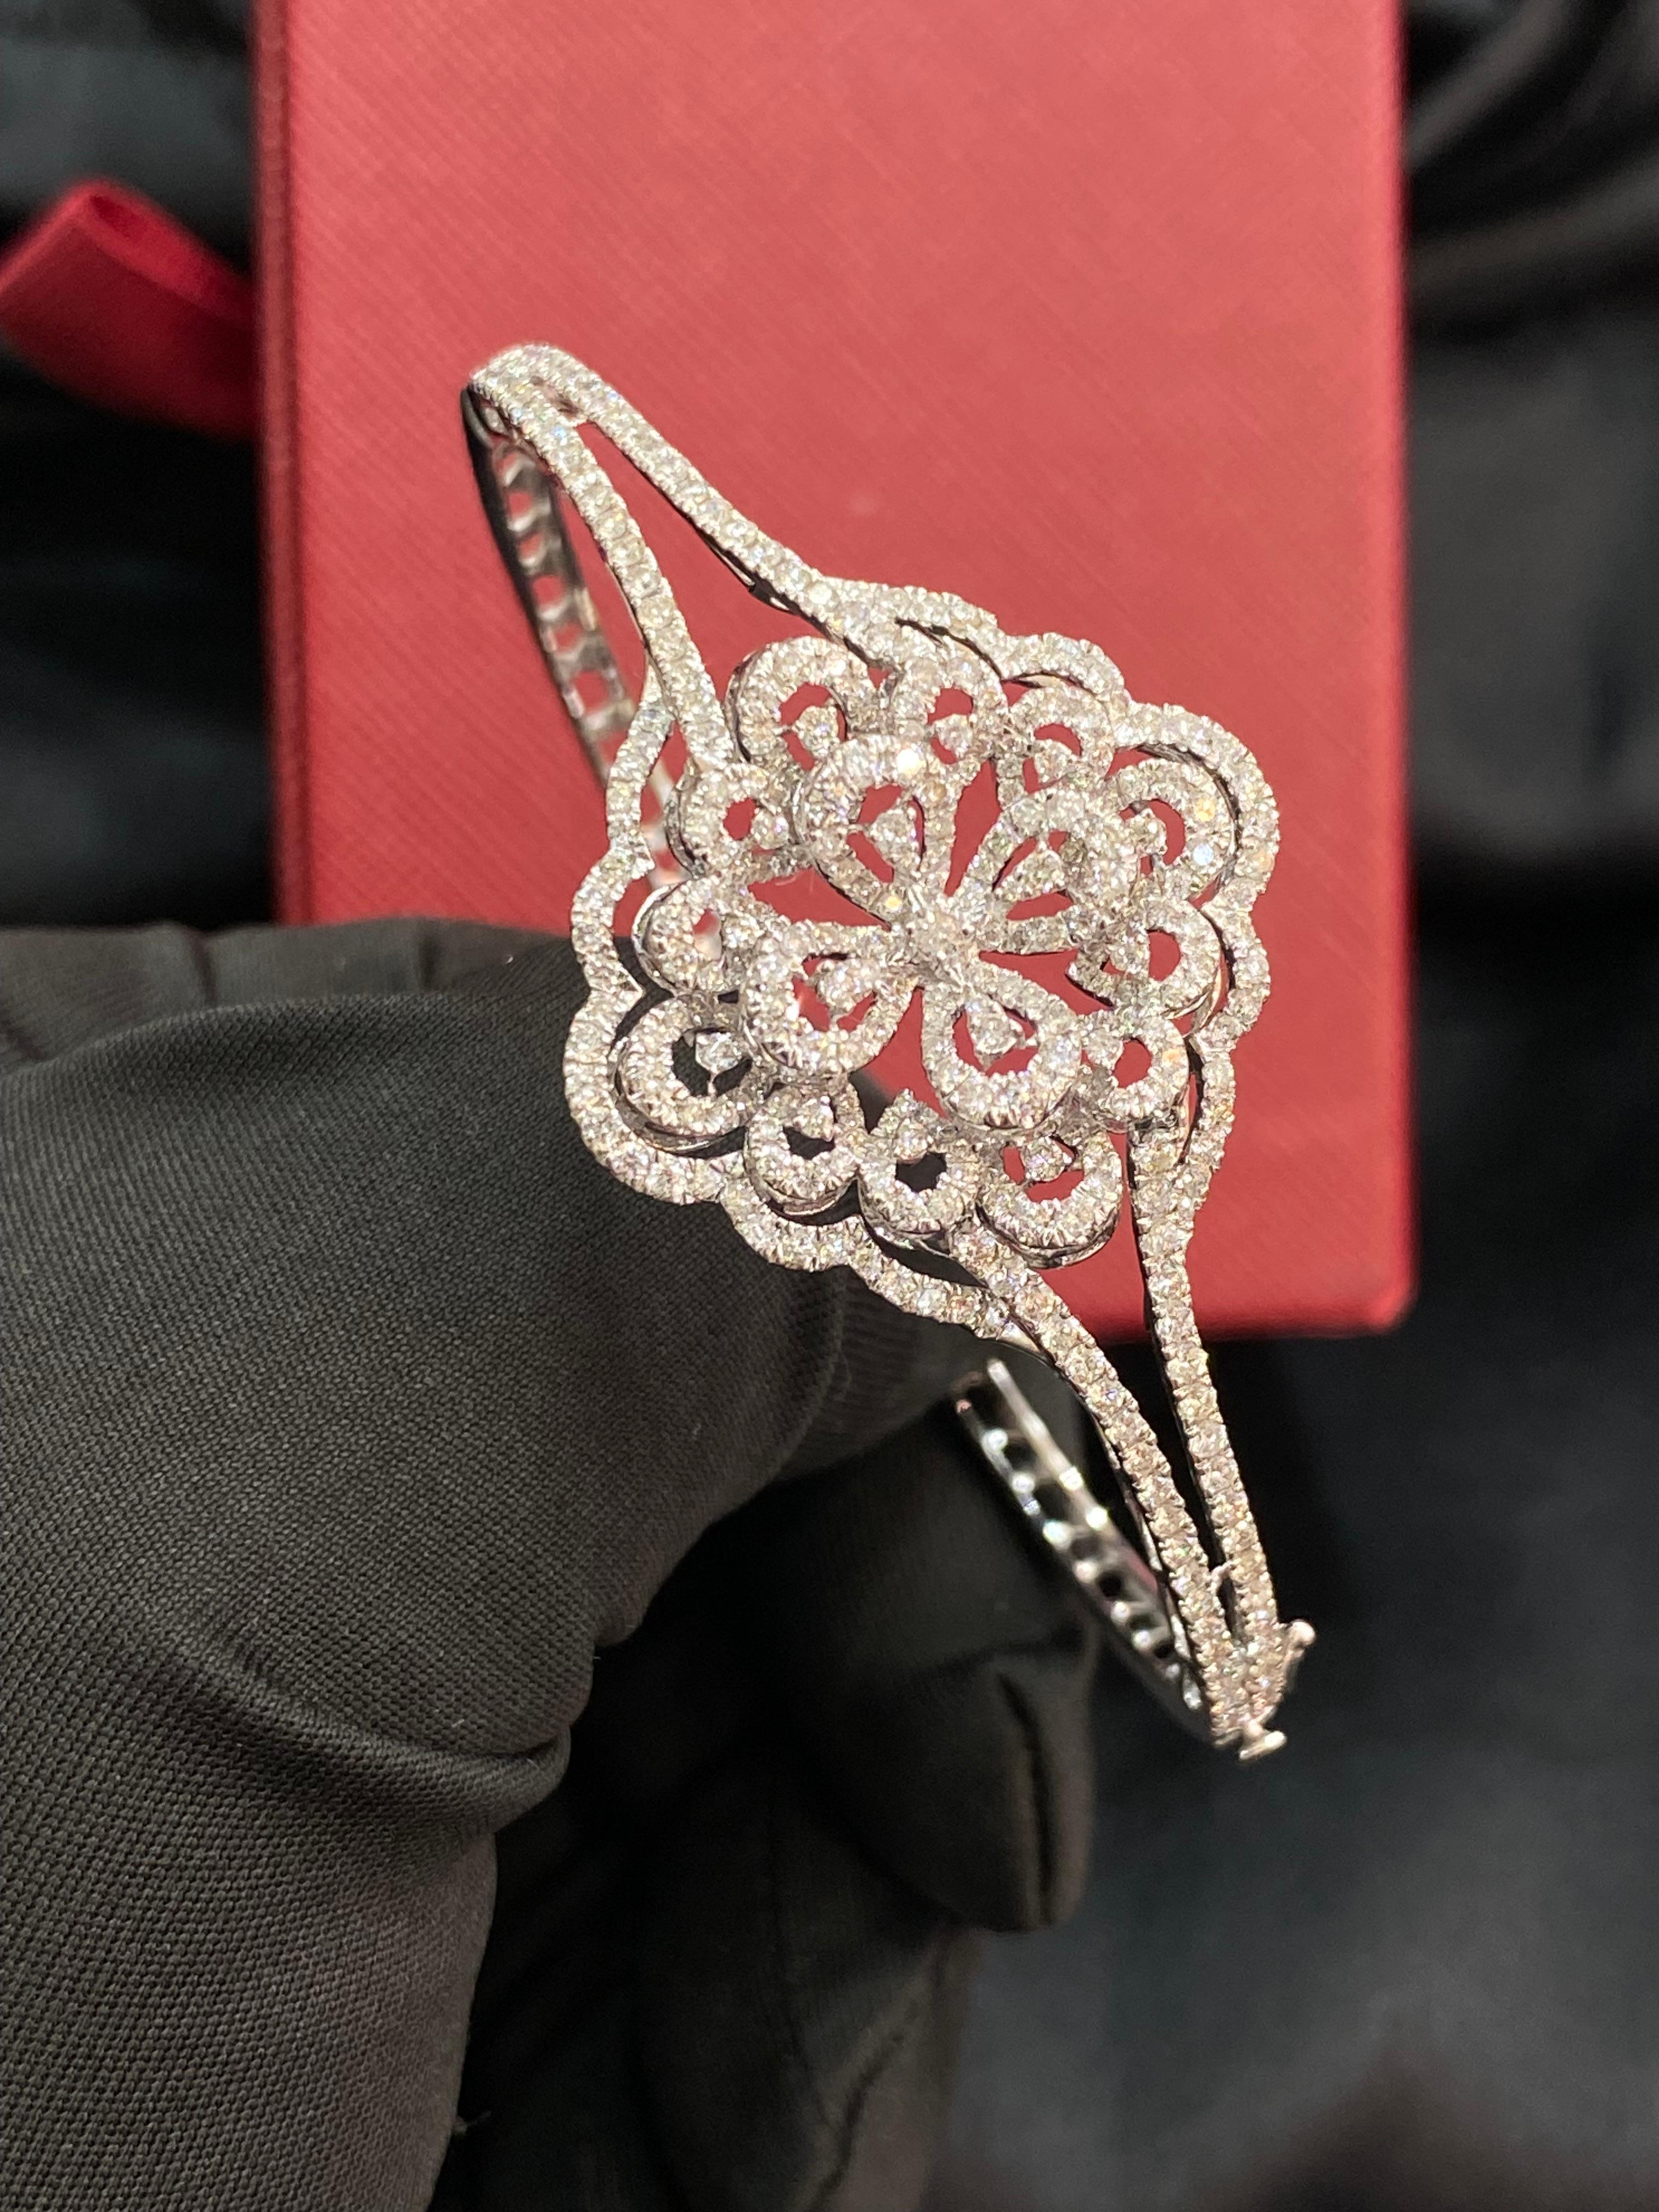 A bracelet this exquisite is bound to evoke a million-dollar smile. Crafted with 2.88 carats of dazzling diamonds in 14K white gold, this piece of beauty promises to make you feel truly regal!

Specifications : 

Diamond Weight : 2.88 Carats
Diamond